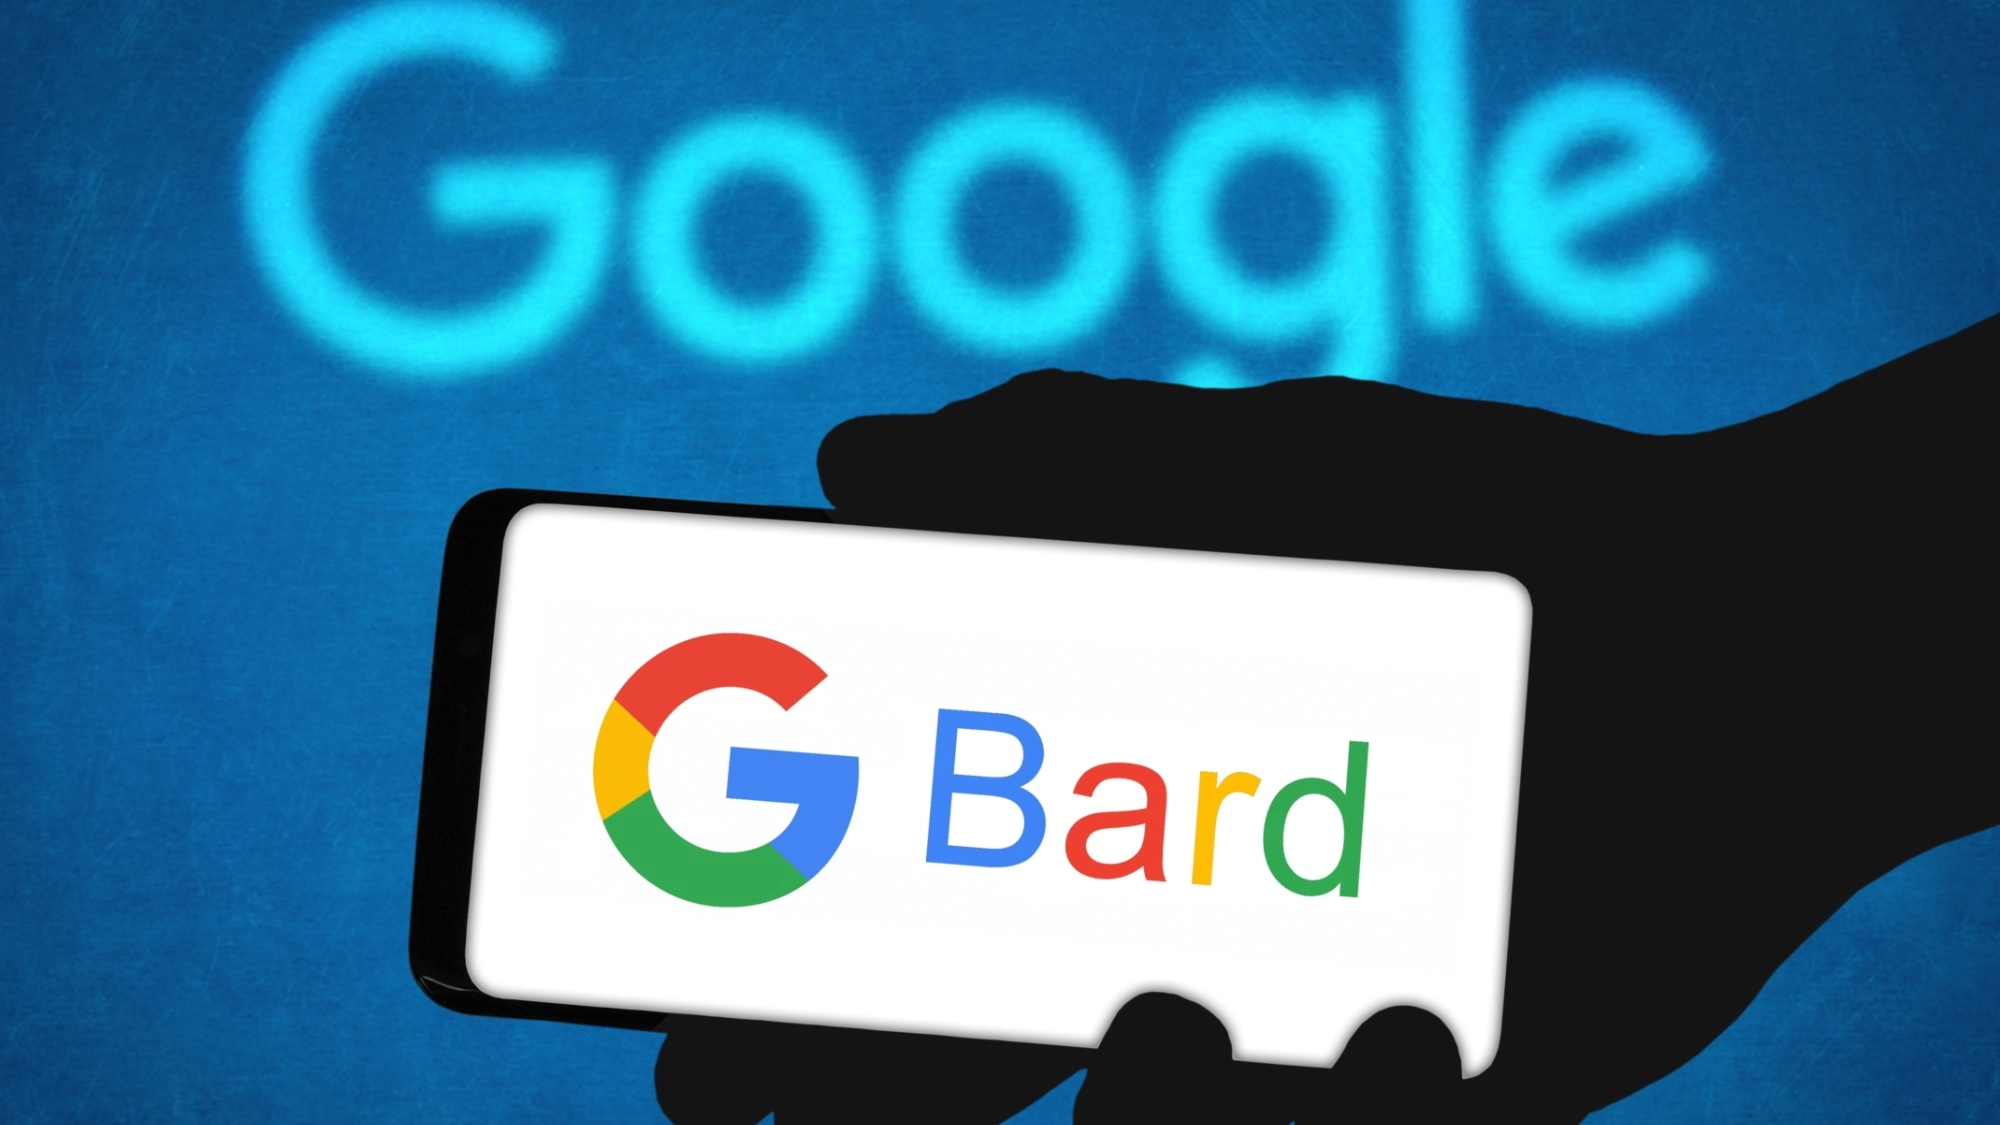 Google introduces image support for Google Bard